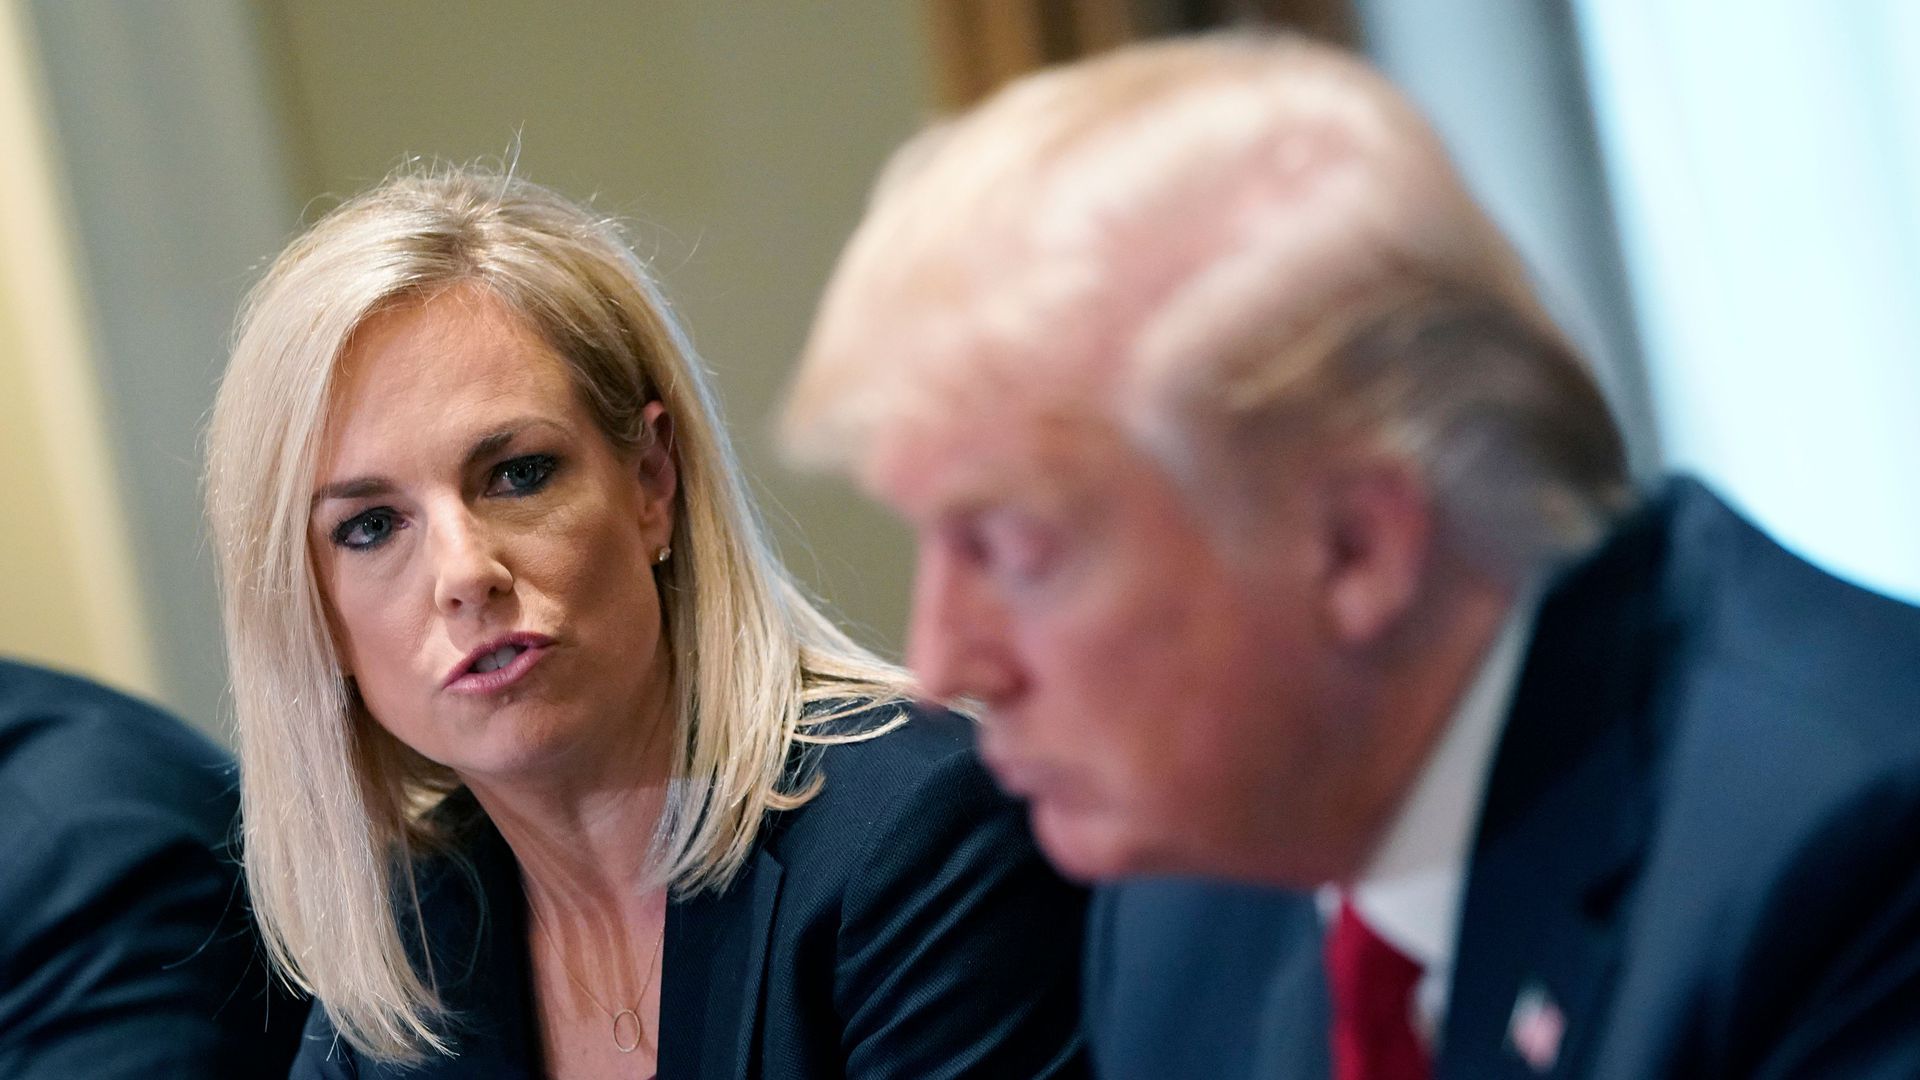 Department of Homeland Security Kirstjen Nielsen speaks as President Donald Trump holds a roundtable discussion with law enforcement officials. Photo: MANDEL NGAN / AFP / Getty Images